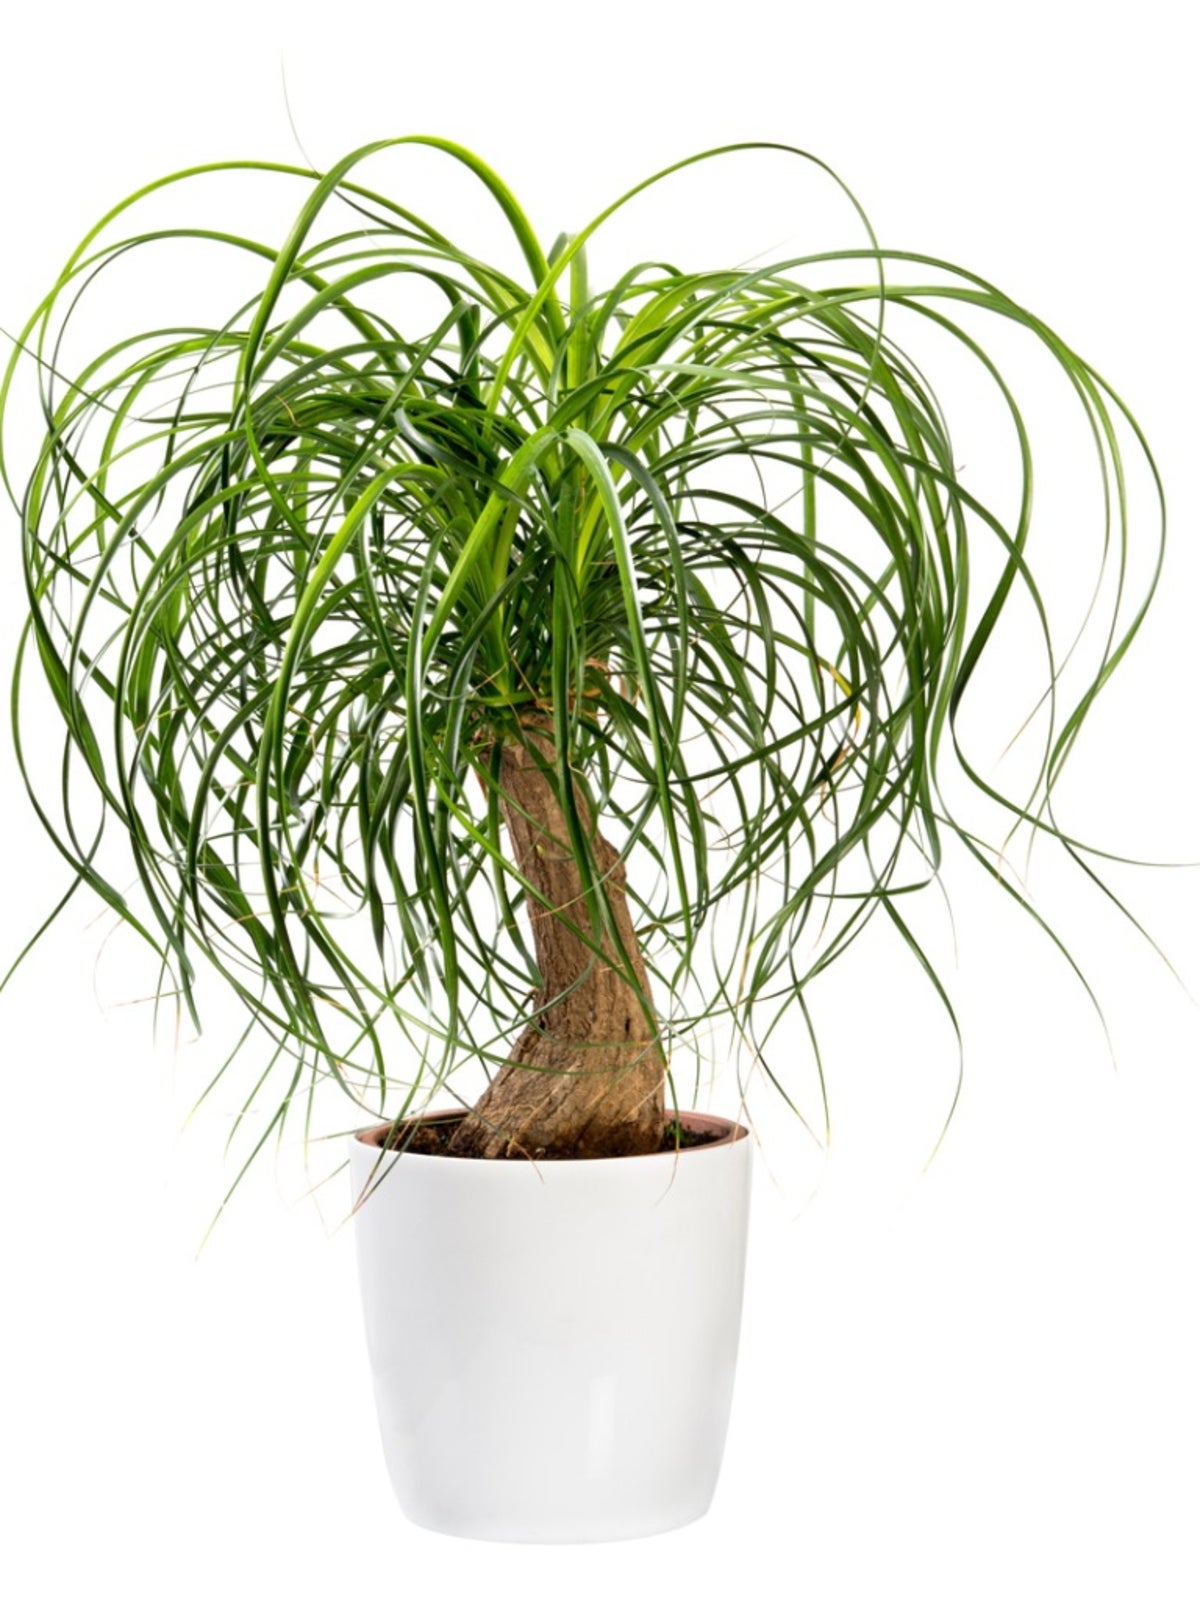 Ponytail palm Care – Propagation, Problems, Brown Tips , Pruning